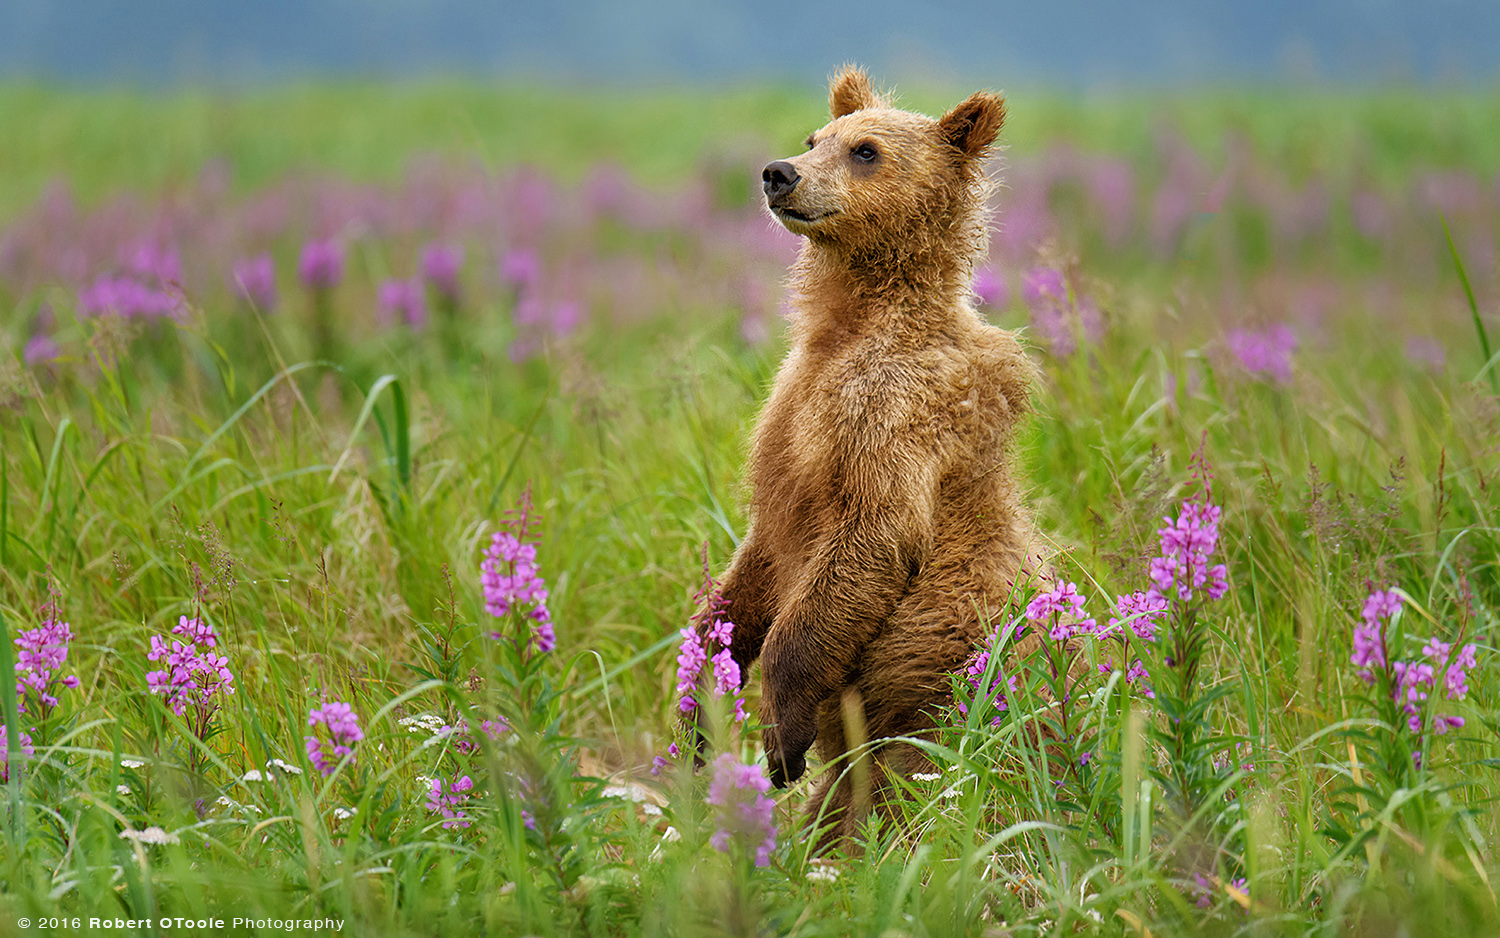 Bear-cub-in-fireweed-flowers-Robert-OToole-Photography